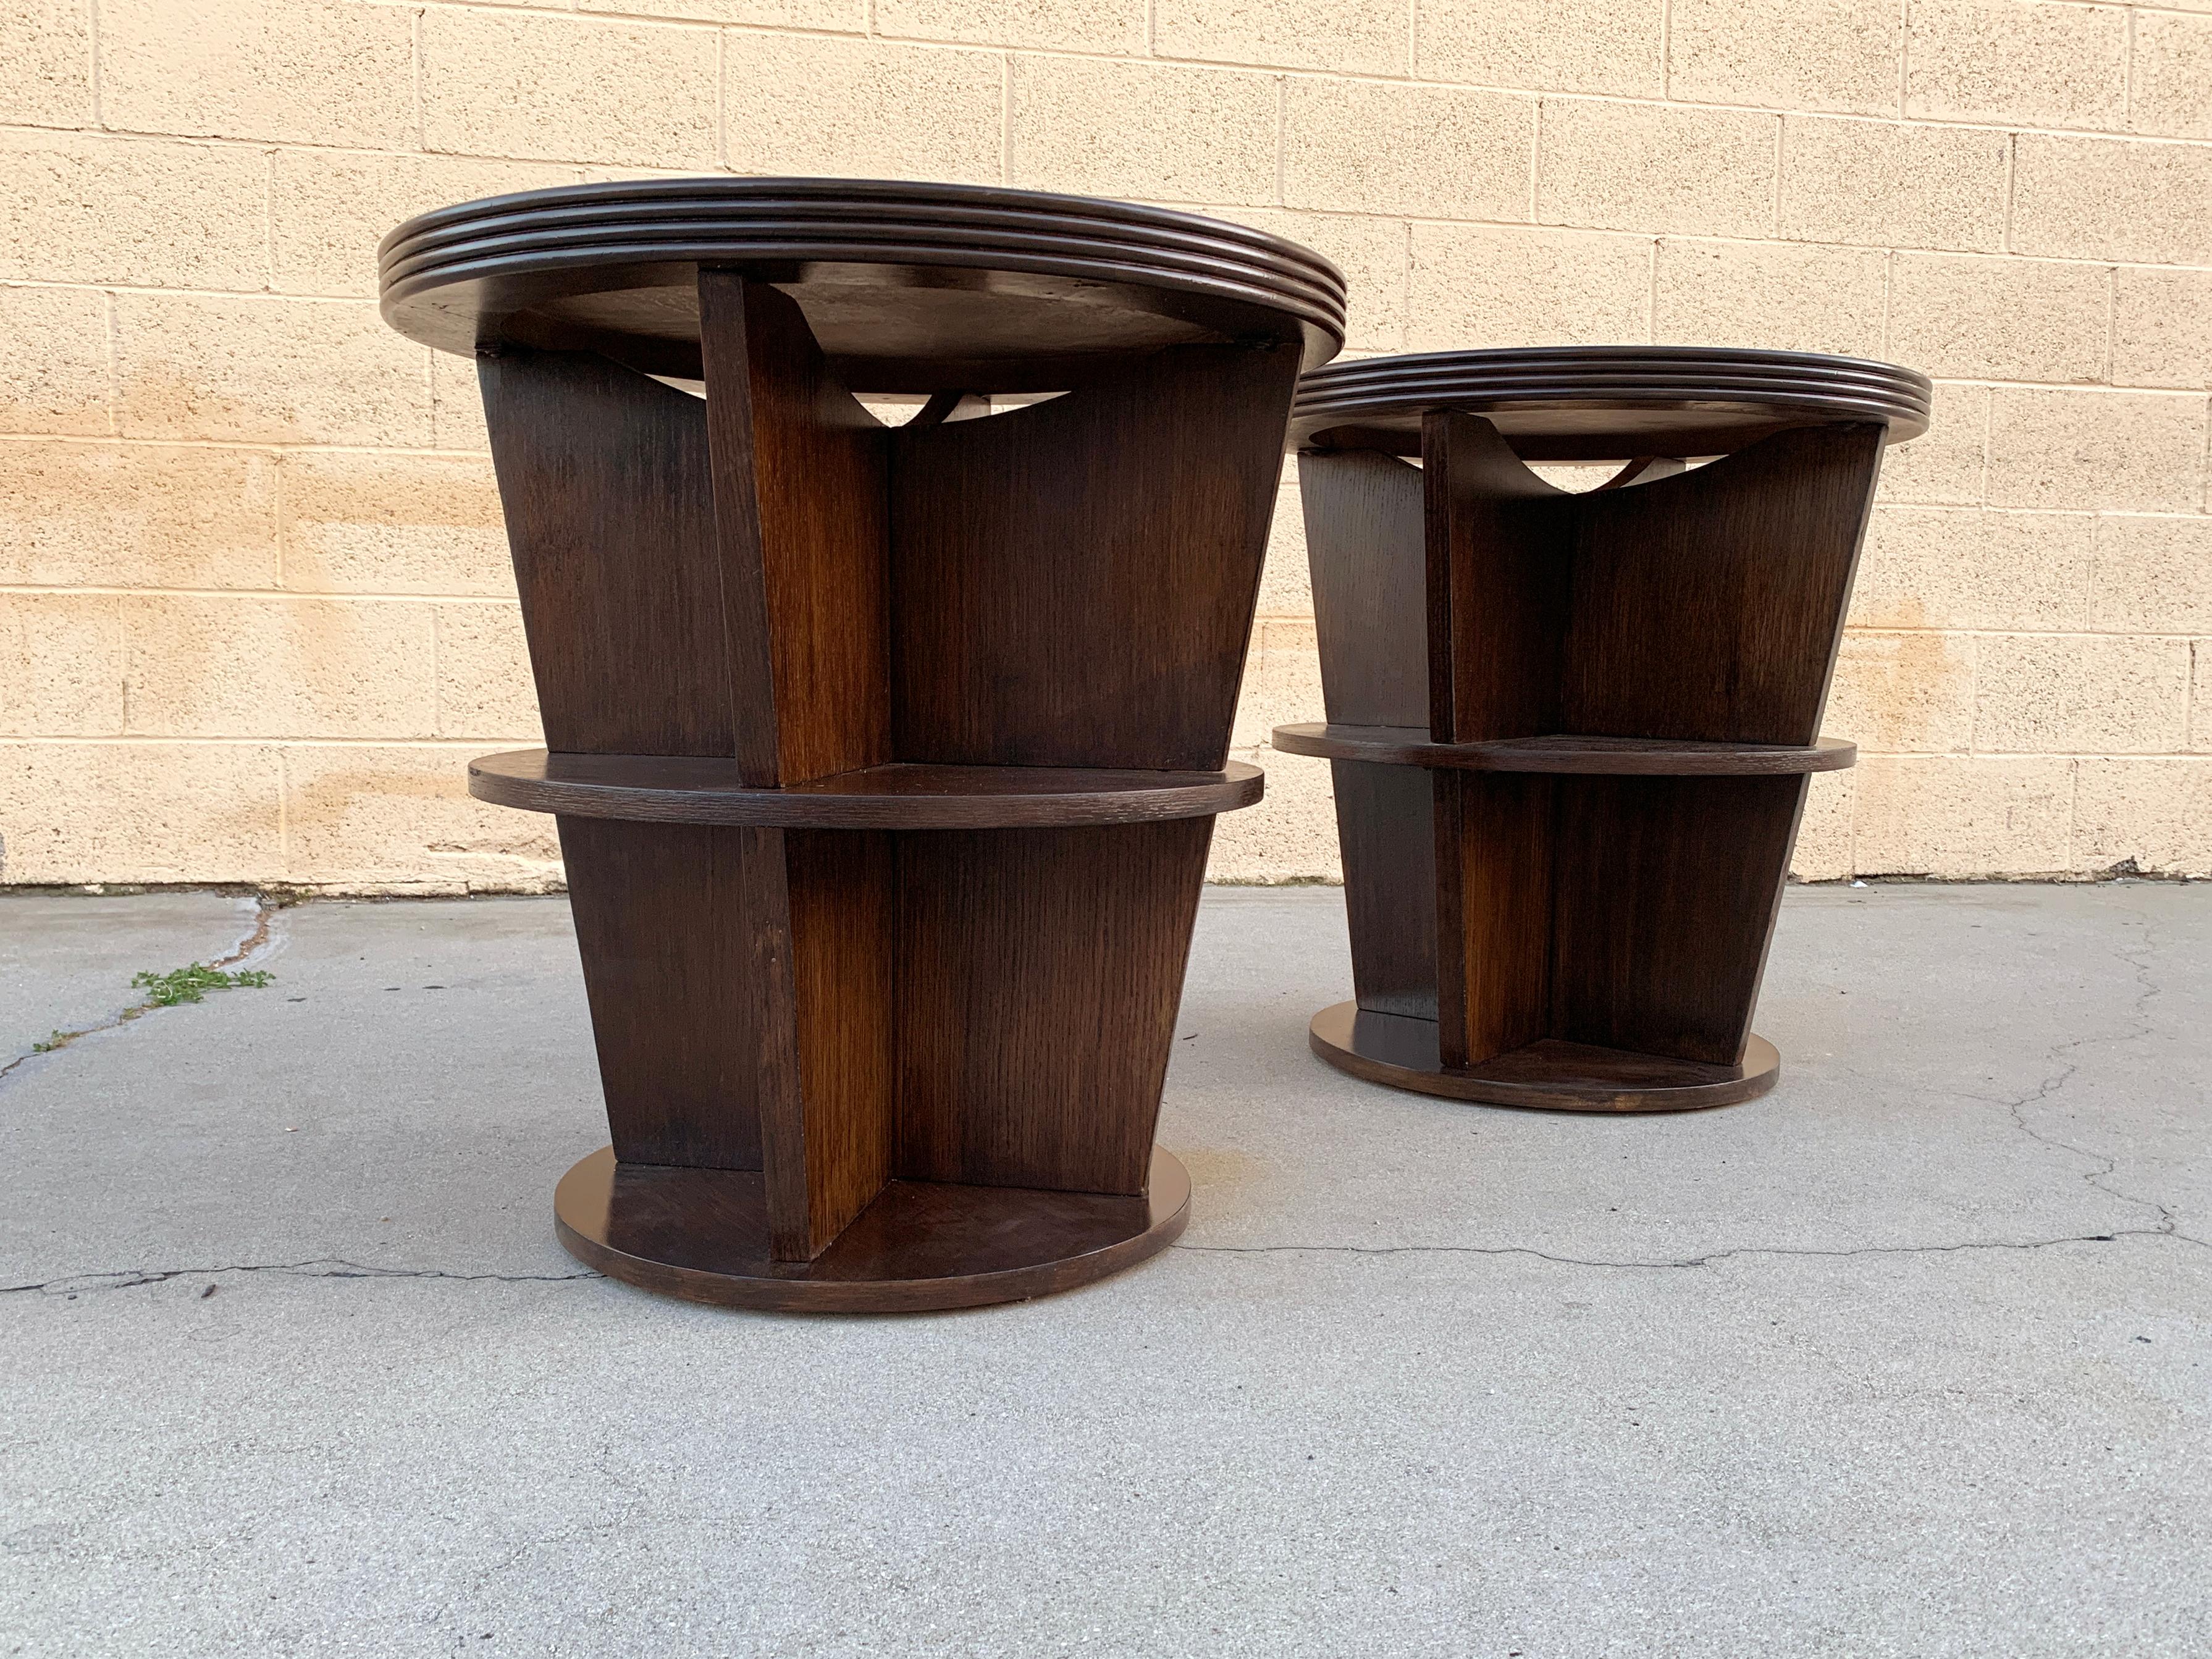 Pair of vintage three-level end tables refinished in a rich espresso stain with clear lacquer. Vintage with Art Deco flair, 1980s.

Well-made and in good condition. Some losses on vertical edges. 

Dimensions: 24